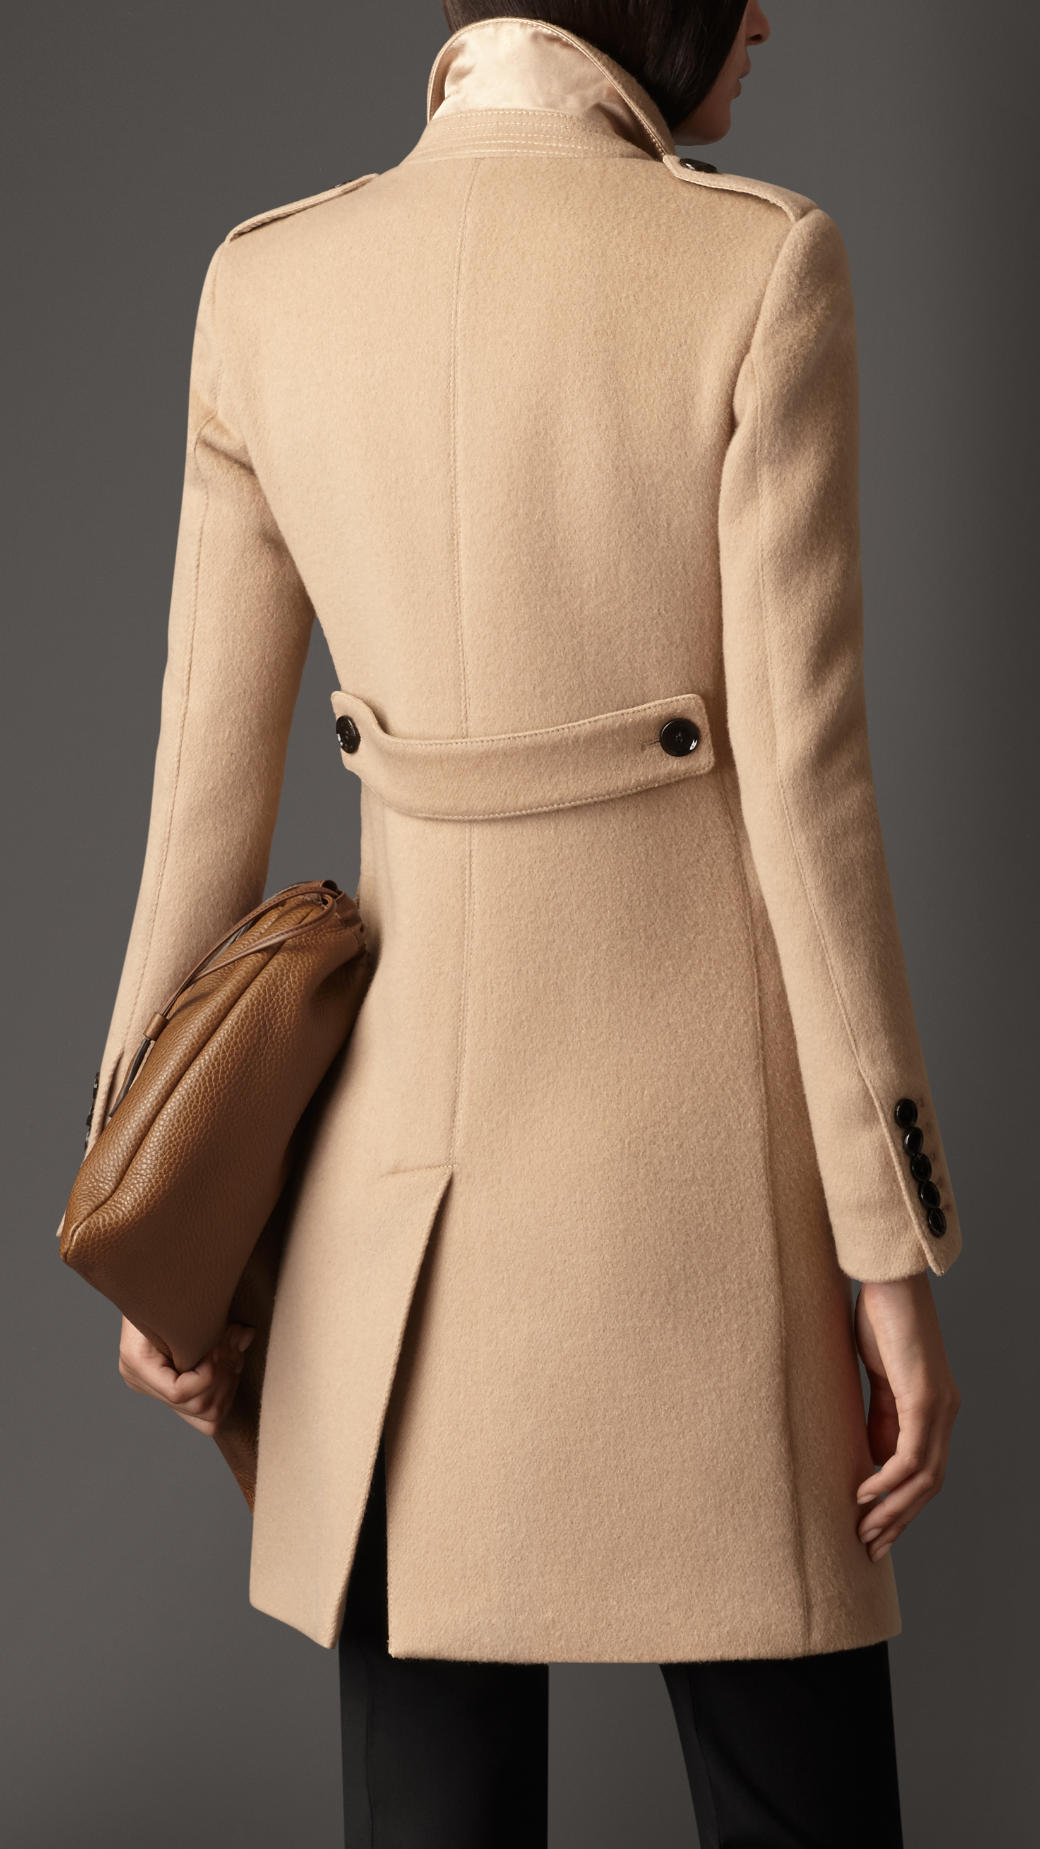 Burberry Sartorial Wool Cashmere Coat in Honey/Stone (Natural) - Lyst